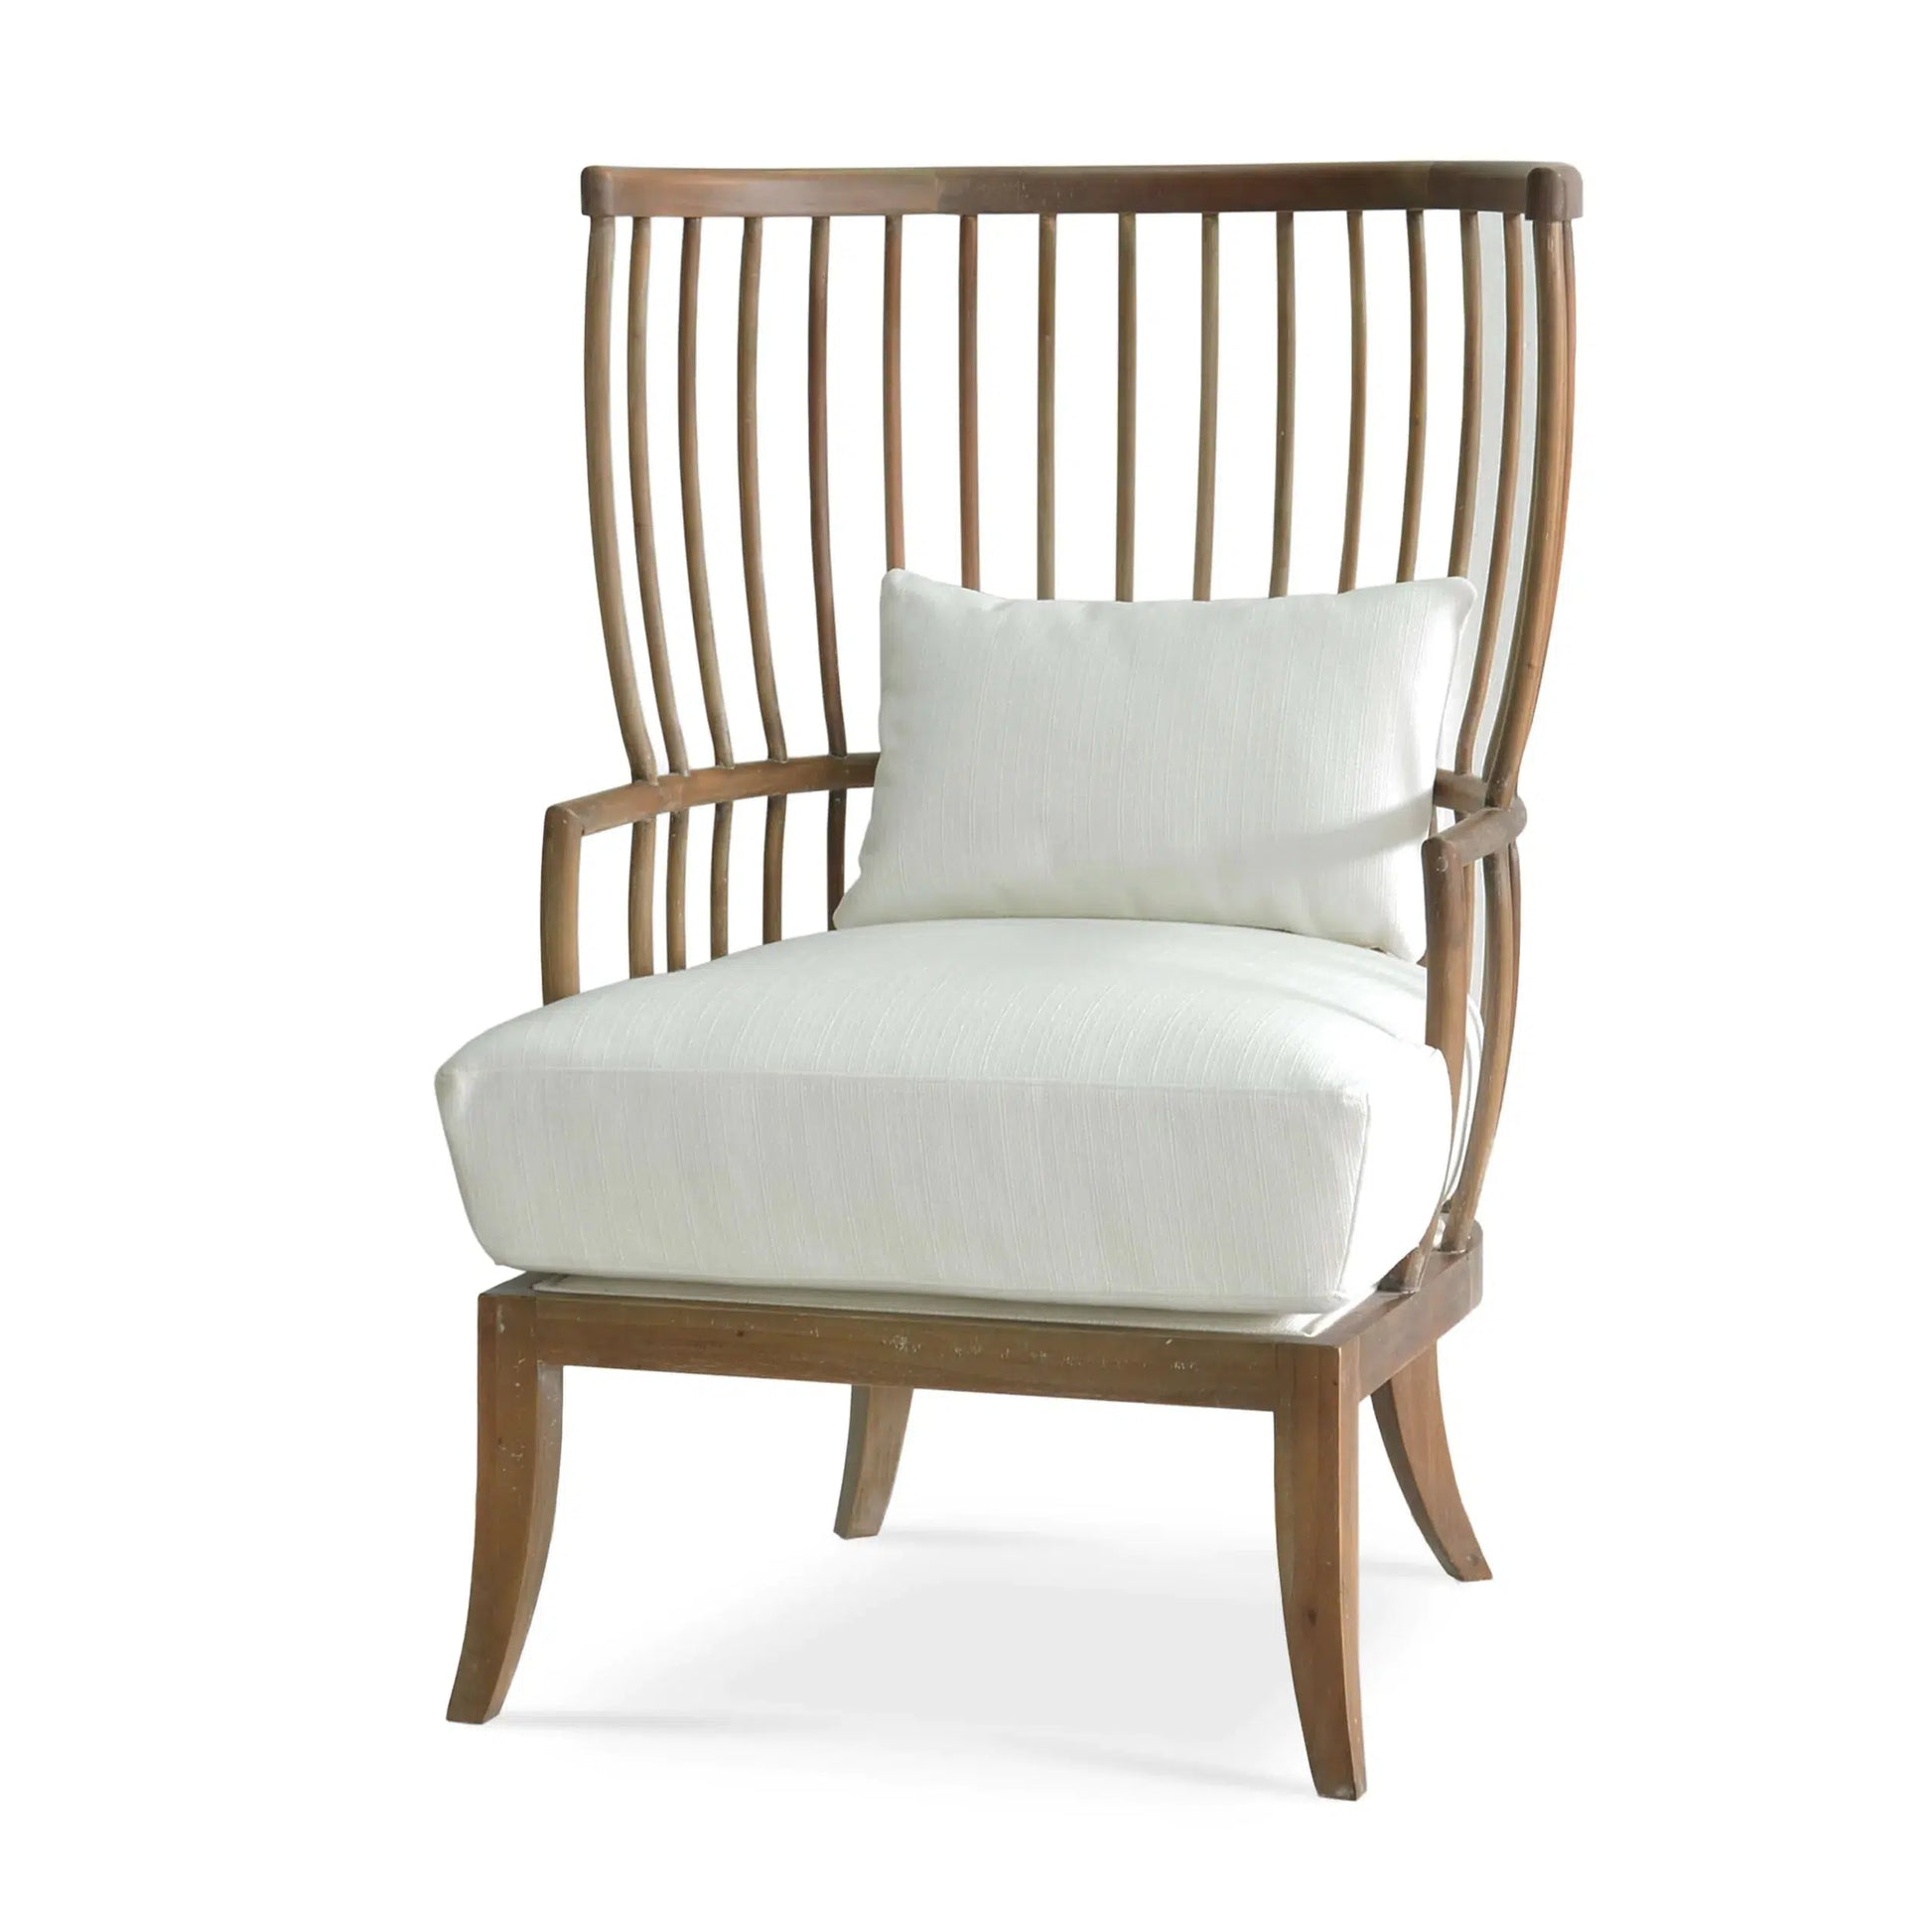 Winston Windsor Chair In Straw Wash w/ Arctic White Performance Fabric-Blue Hand Home